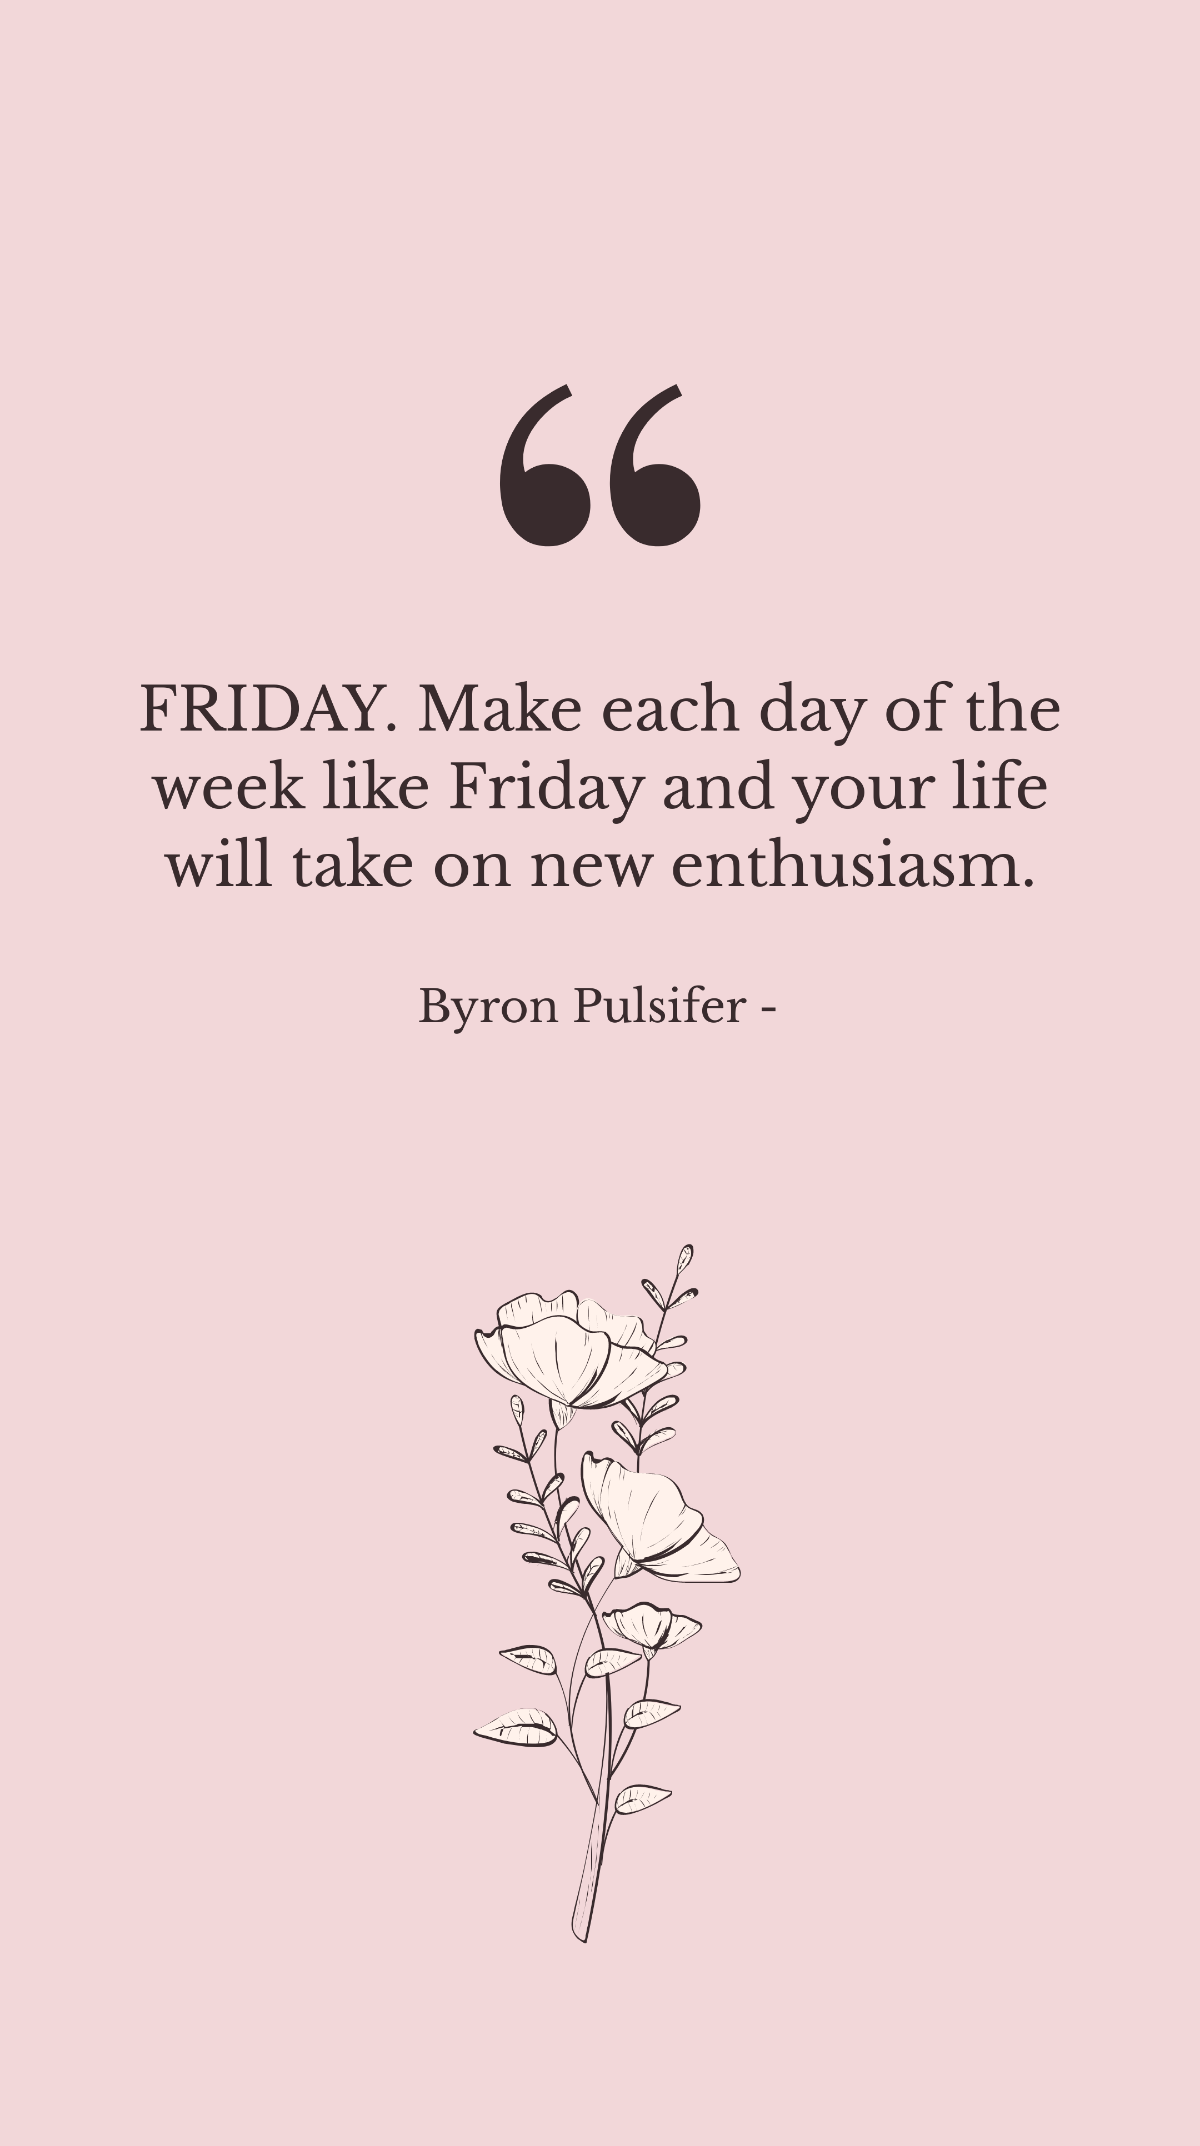 Free Byron Pulsifer - FRIDAY. Make each day of the week like Friday and your life will take on new enthusiasm. Template